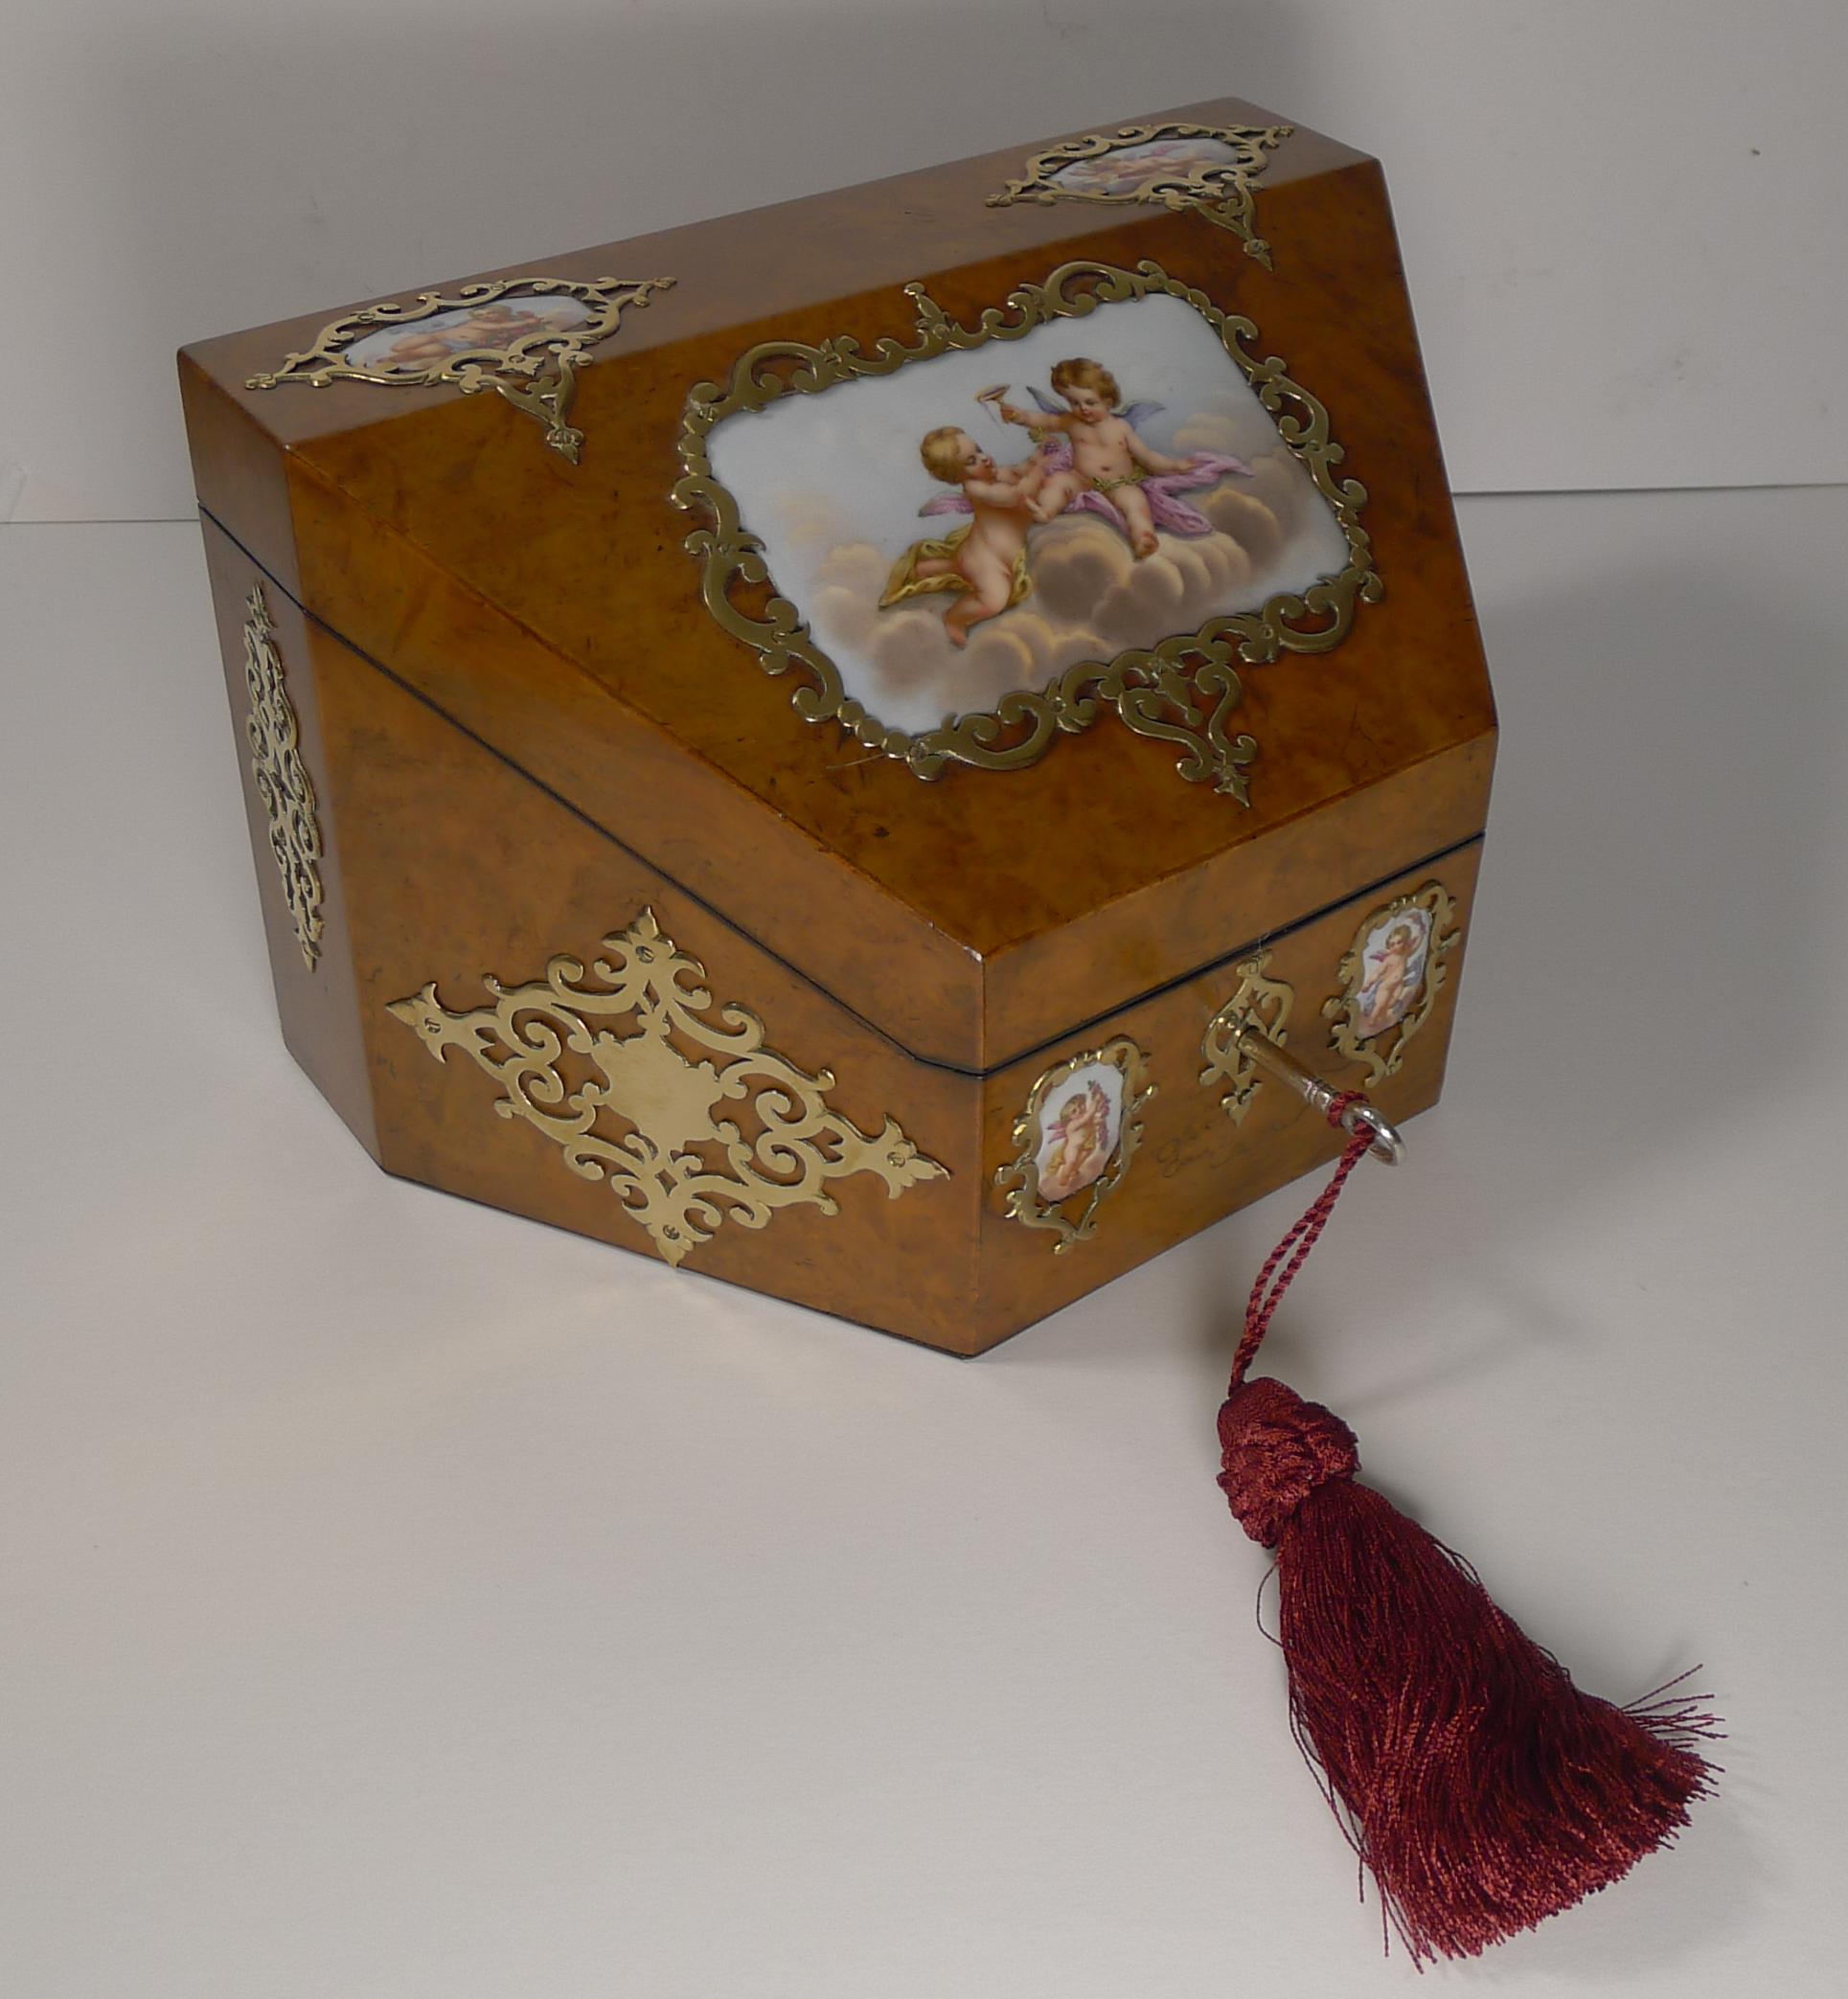 A quite wonderful and romantic stationery box, ready to grace the finest of desk-tops.

Made from burr walnut the wedge shaped box is smothered in fine quality polished brass mounts and five fabulous hand painted porcelain plaques, all without